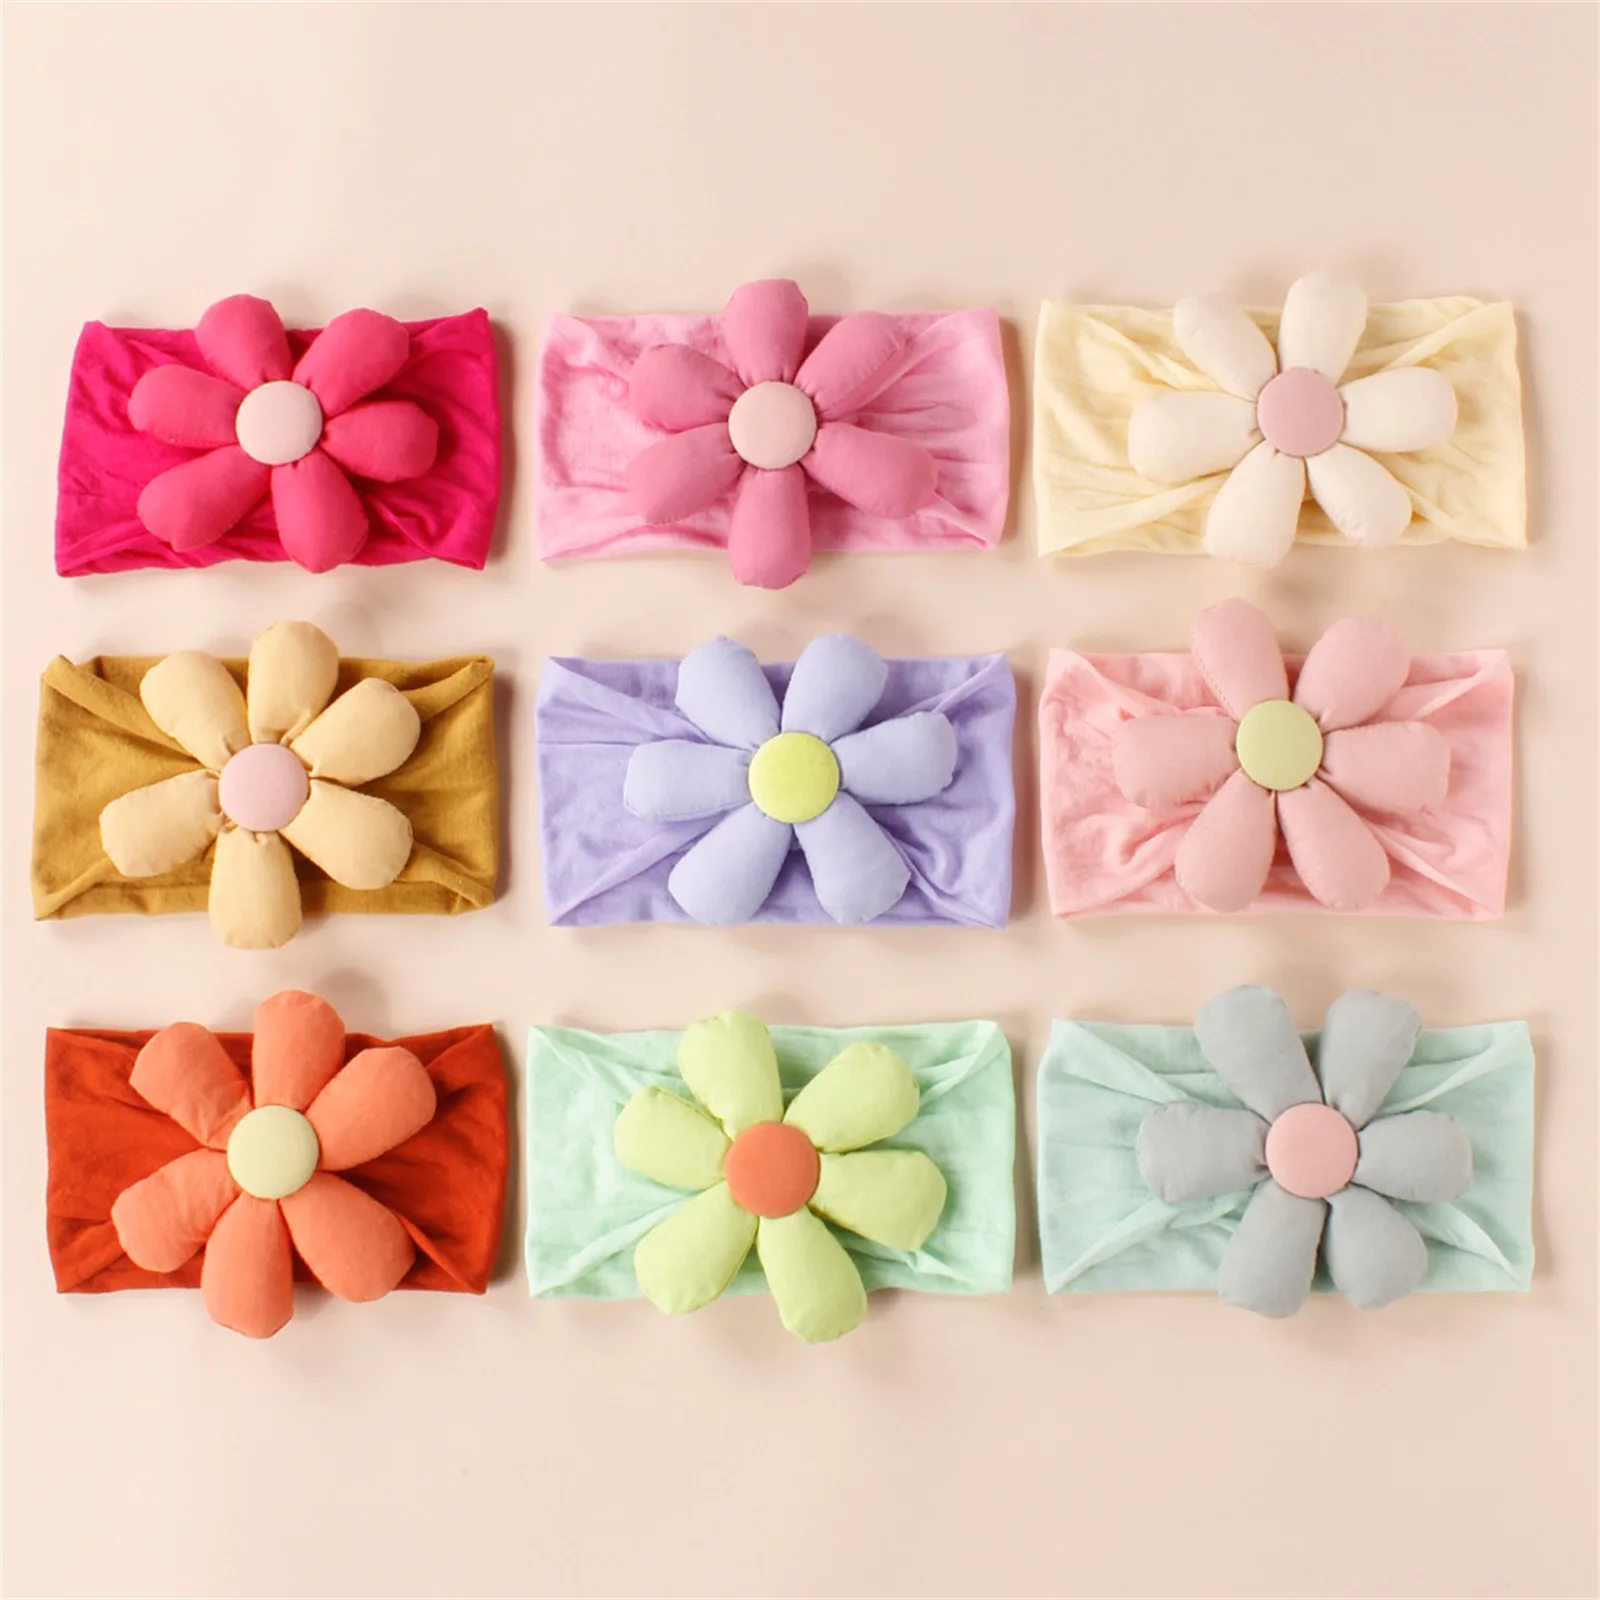 

Winkinlin Infant Baby Girls Headbands Soft Elastic Flower Head Wraps Photo Props Cute Hair Accessories (Green One Size)